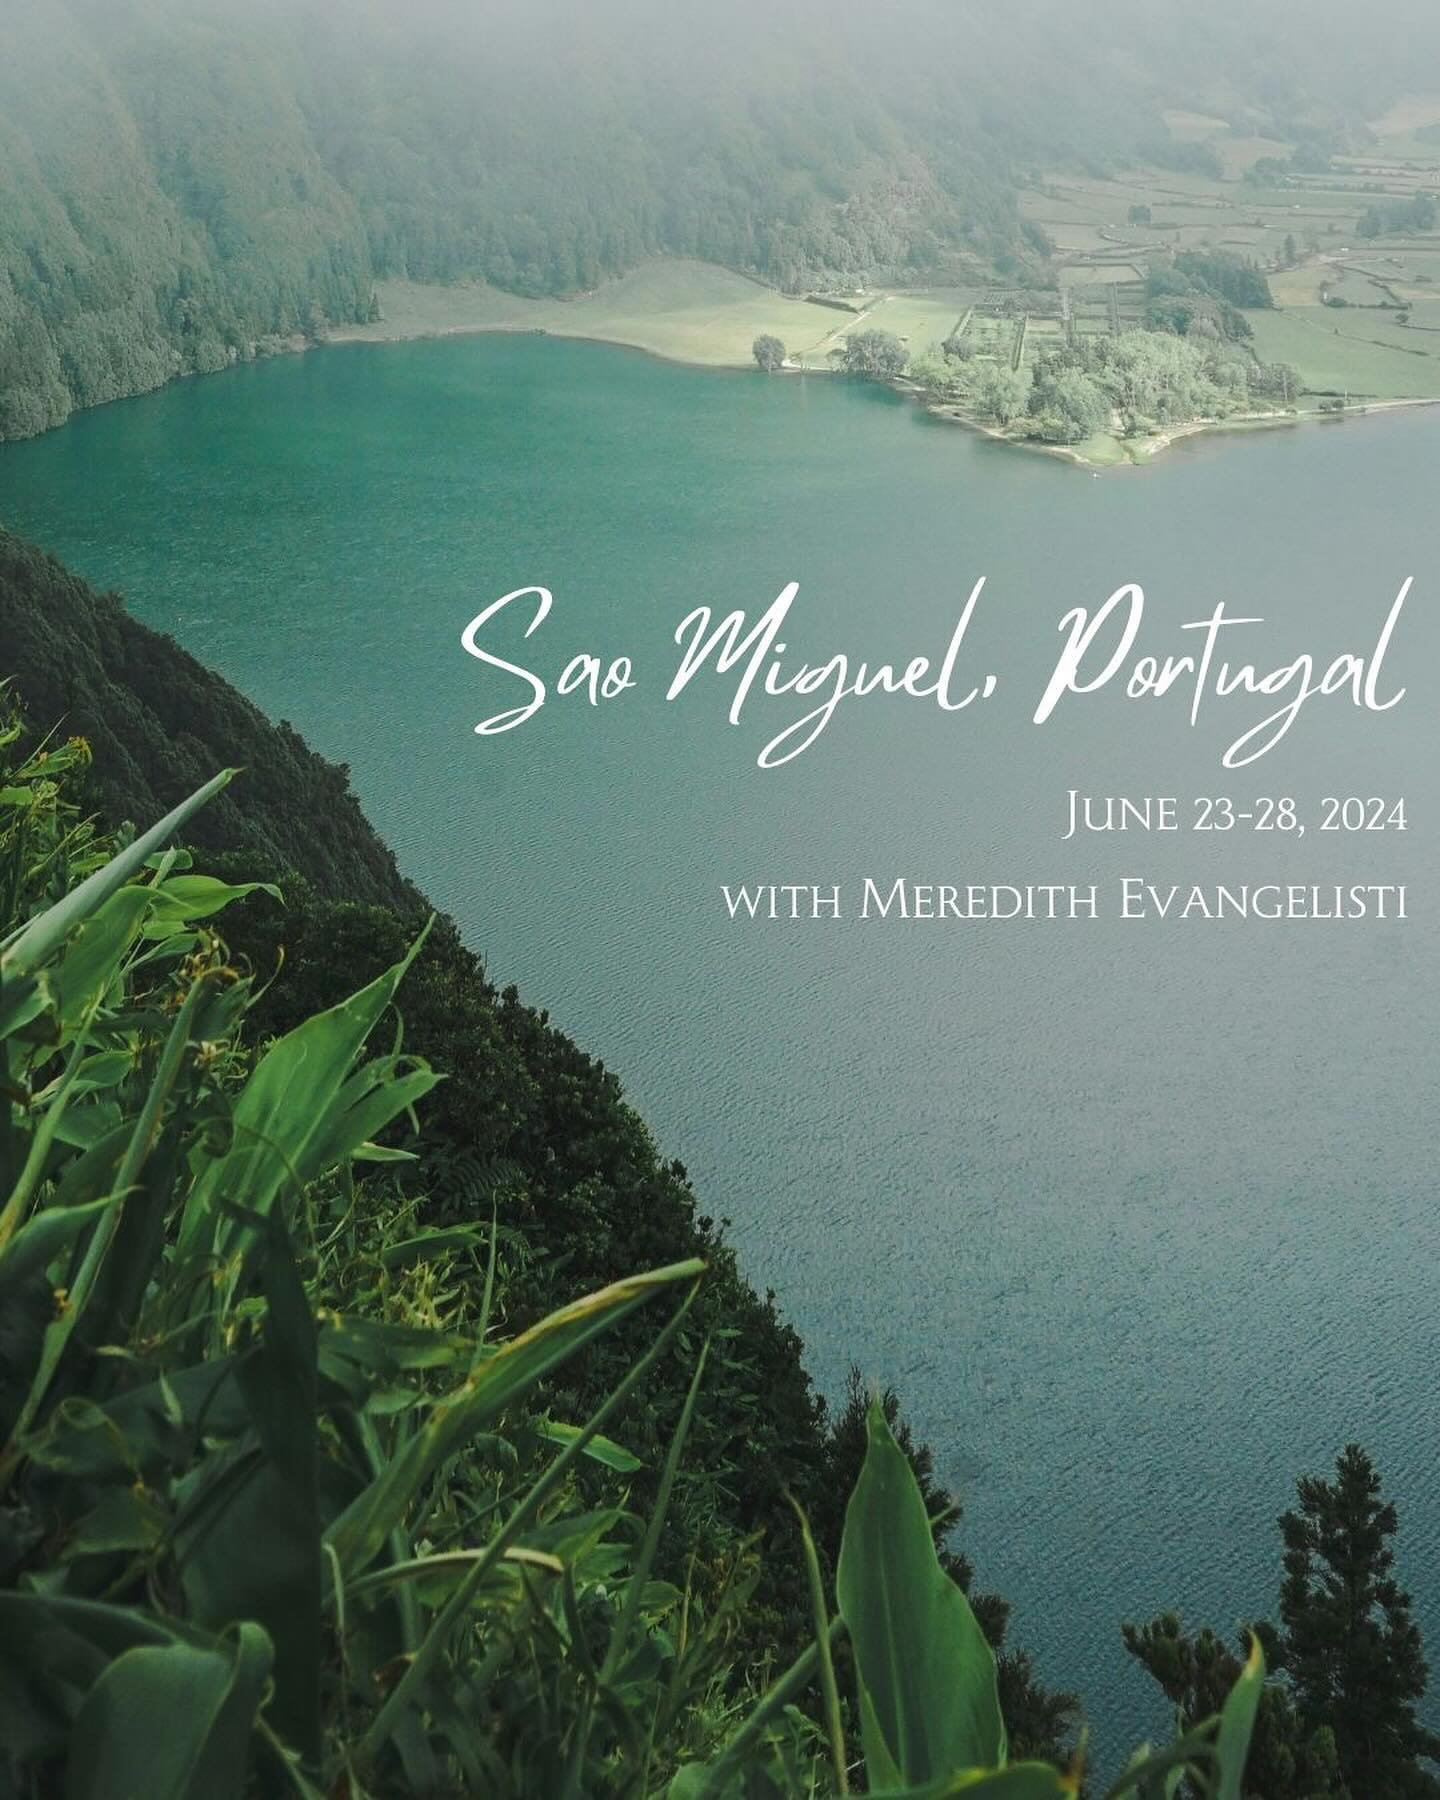 Ready for a get-away? ✈️ We&rsquo;ve got you covered! FIVE retreats take off over the next year, with specialities for any student, as well as both domestic &amp; international options.

🇵🇹 Join Meredith in the Azores for an action packed explorati